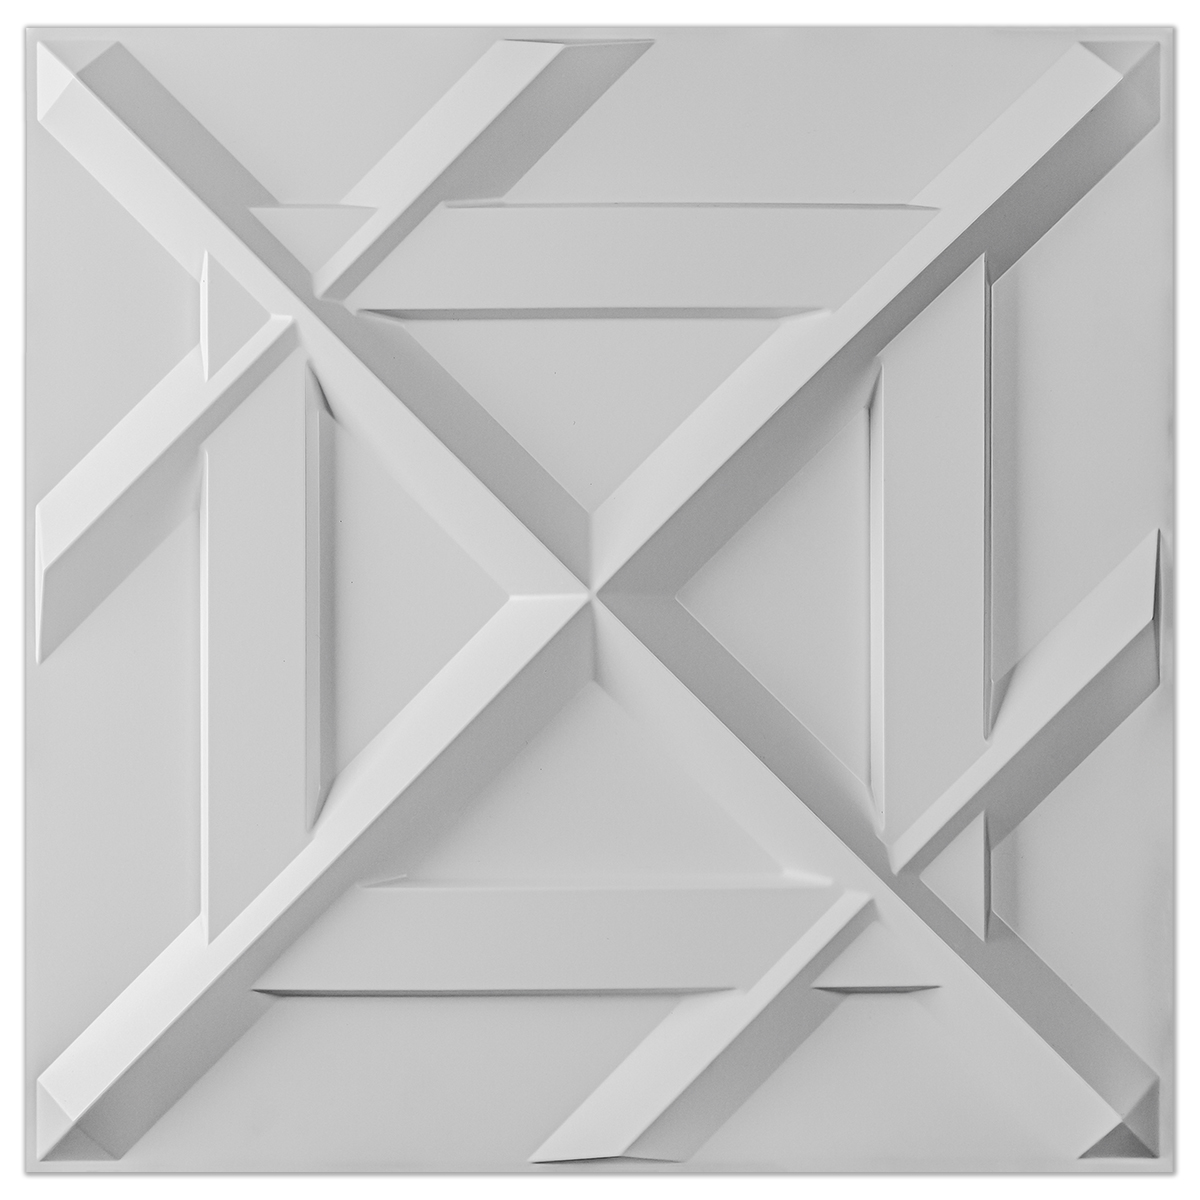 A10054WT-Art3d PVC 3D Wall Panel, Decorative Wall Tile in White 12-Pack 19.7